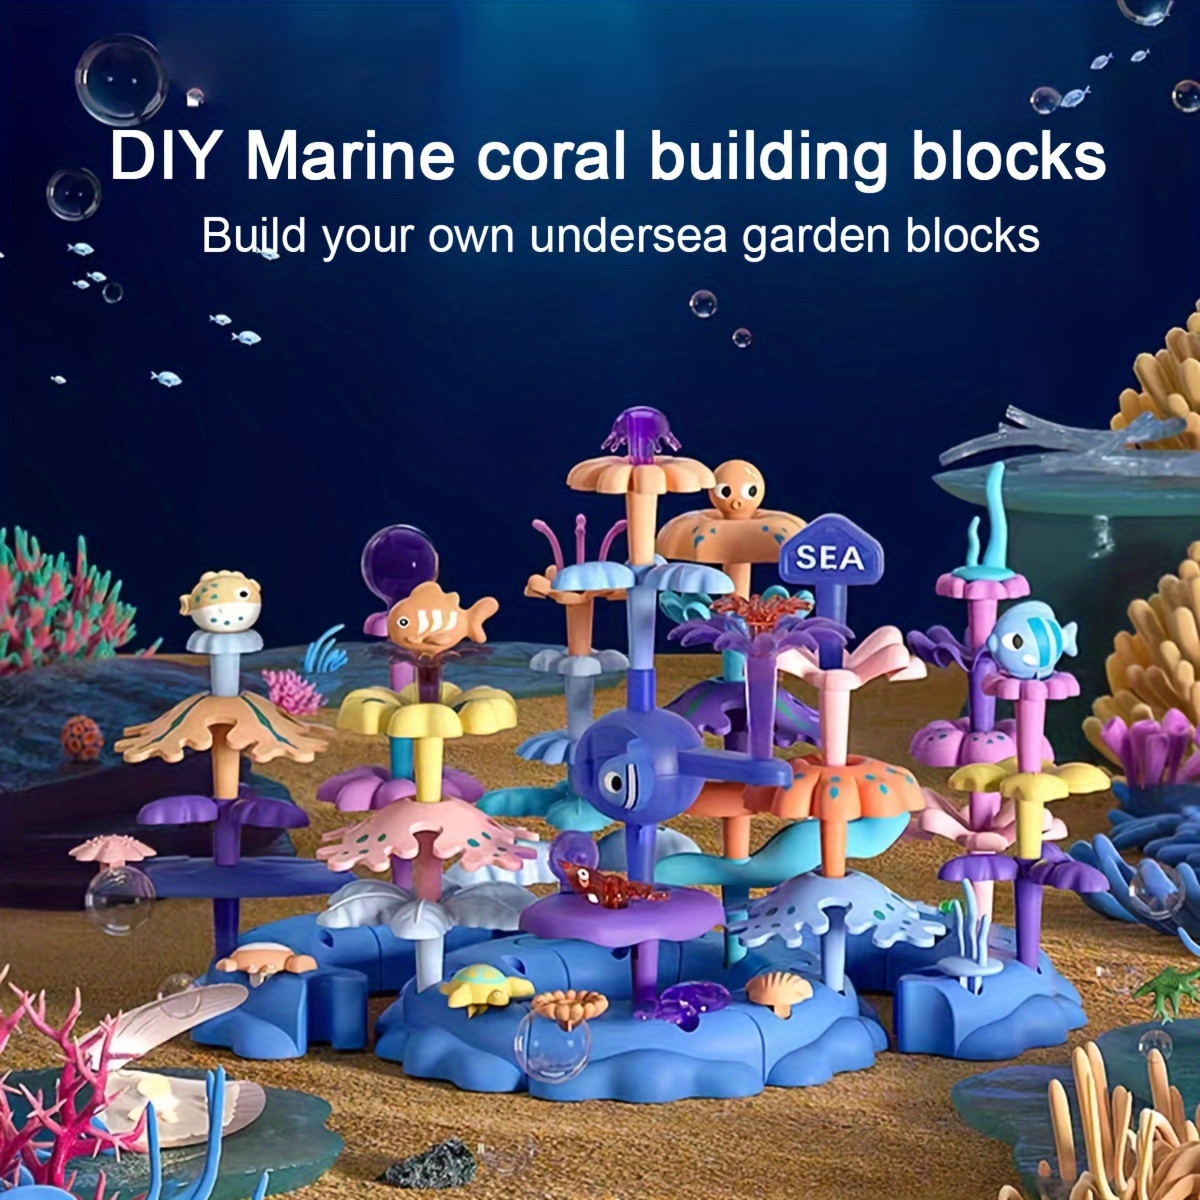 Coral reef: Underwater scene with cardboard boat  Sea crafts, Ocean  crafts, Under the sea decorations